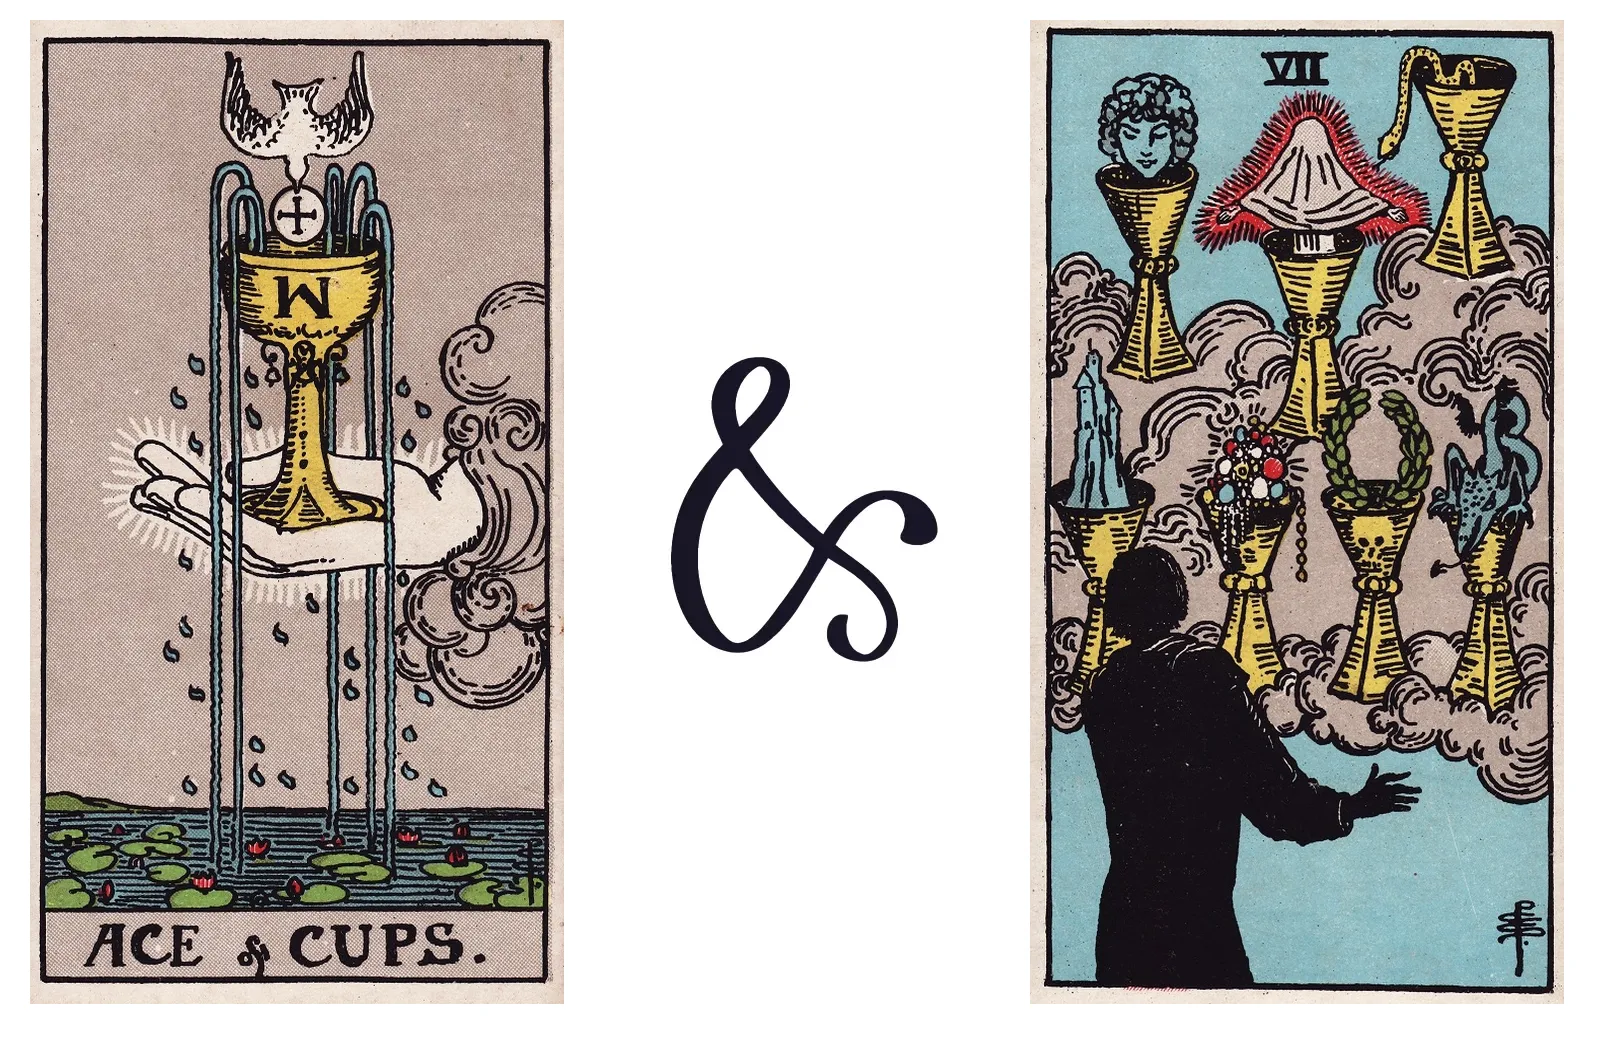 Ace of Cups and Seven of Cups